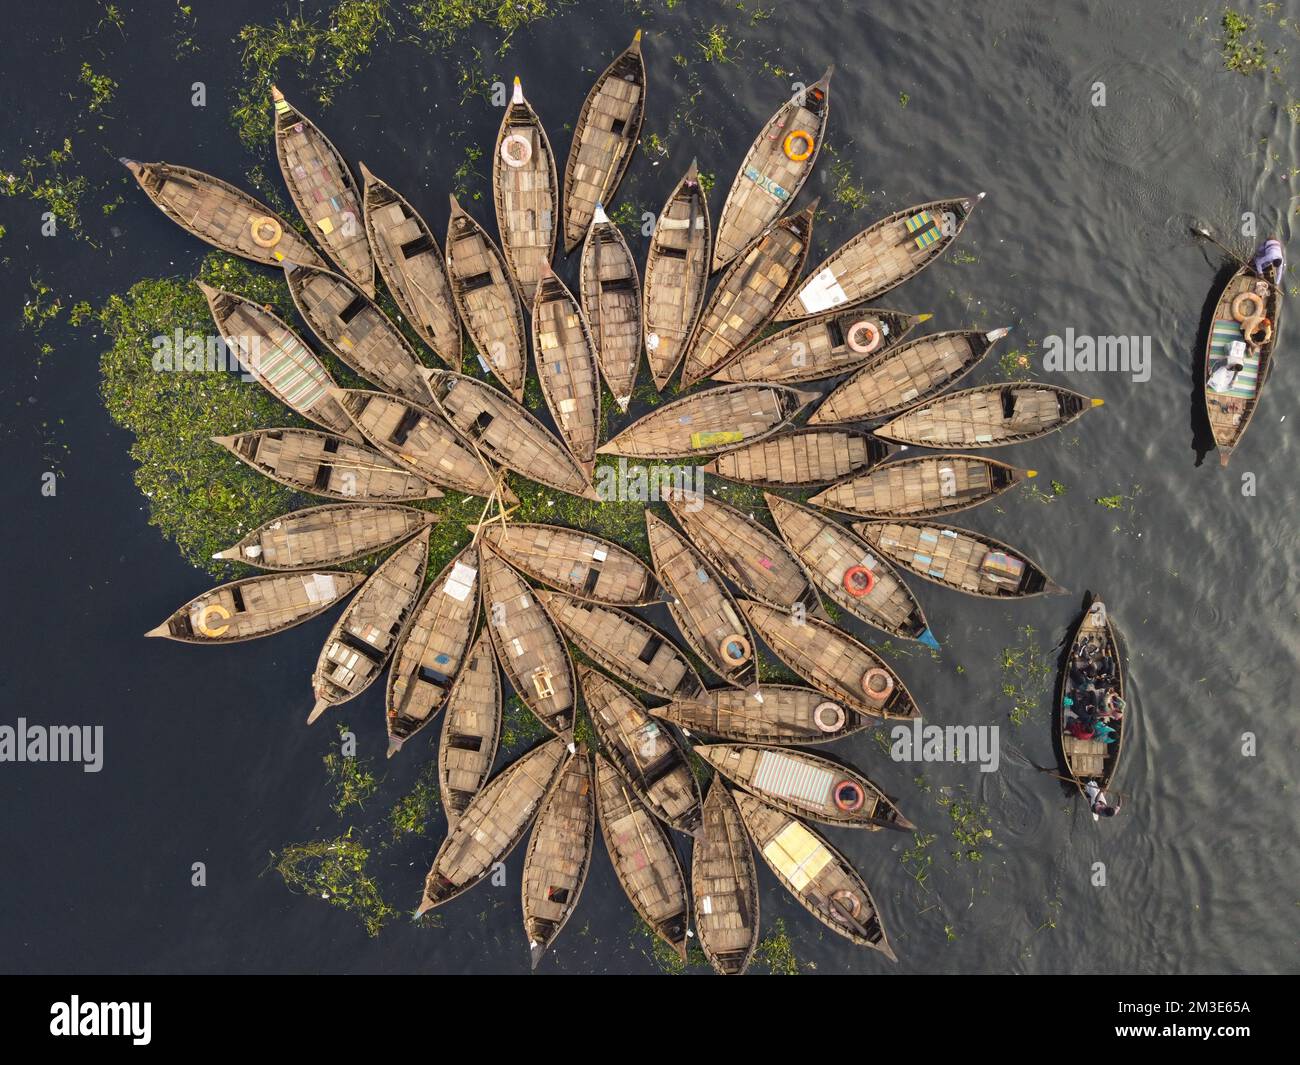 Dhaka, Bangladesh. 15th Dec, 2022. A fleet of wooden boats fans out around their moorings in the Buriganga River in Dhaka, Bangladesh. The river is widely used to transport goods, produce, and people. An estimated 50,000 commuters cross the Buriganga from Keraniganj to work in Dhaka, and many take boats. Hundreds of small boats, called 'Dinghy Noukas', are moored in the river port of Dhaka, the capital of Bangladesh. In them, ferrymen transport workers, goods, and tourists across the Buriganga River every day. Credit: Joy Saha/Alamy Live News Stock Photo